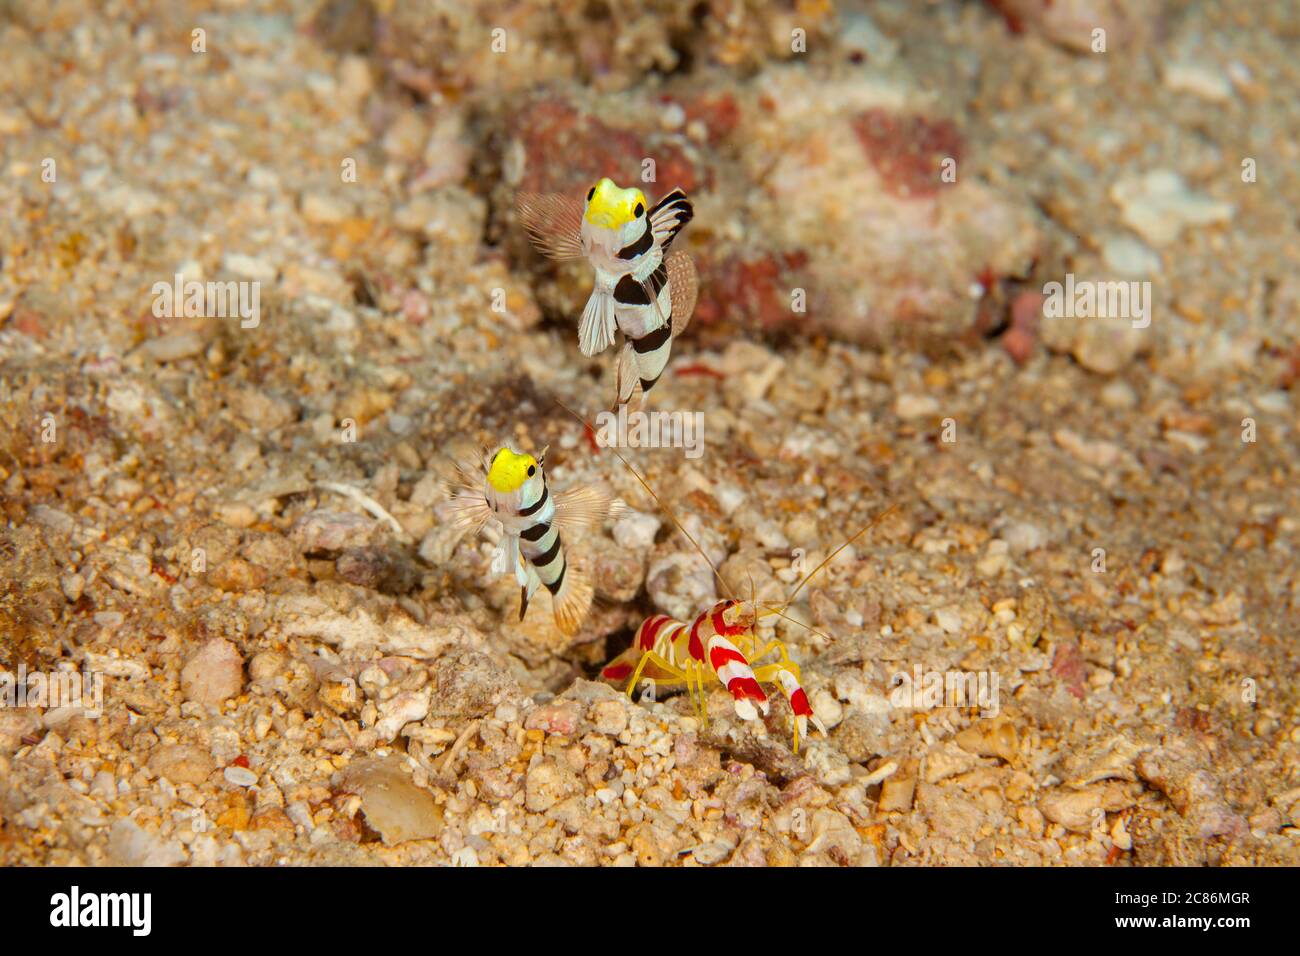 A pair of yellownose shrimp gobies, Stonogobiops xanthorhinica, with Randalls blind snapping shrimp, Alpheus randalli, who is excavating their den.  A Stock Photo